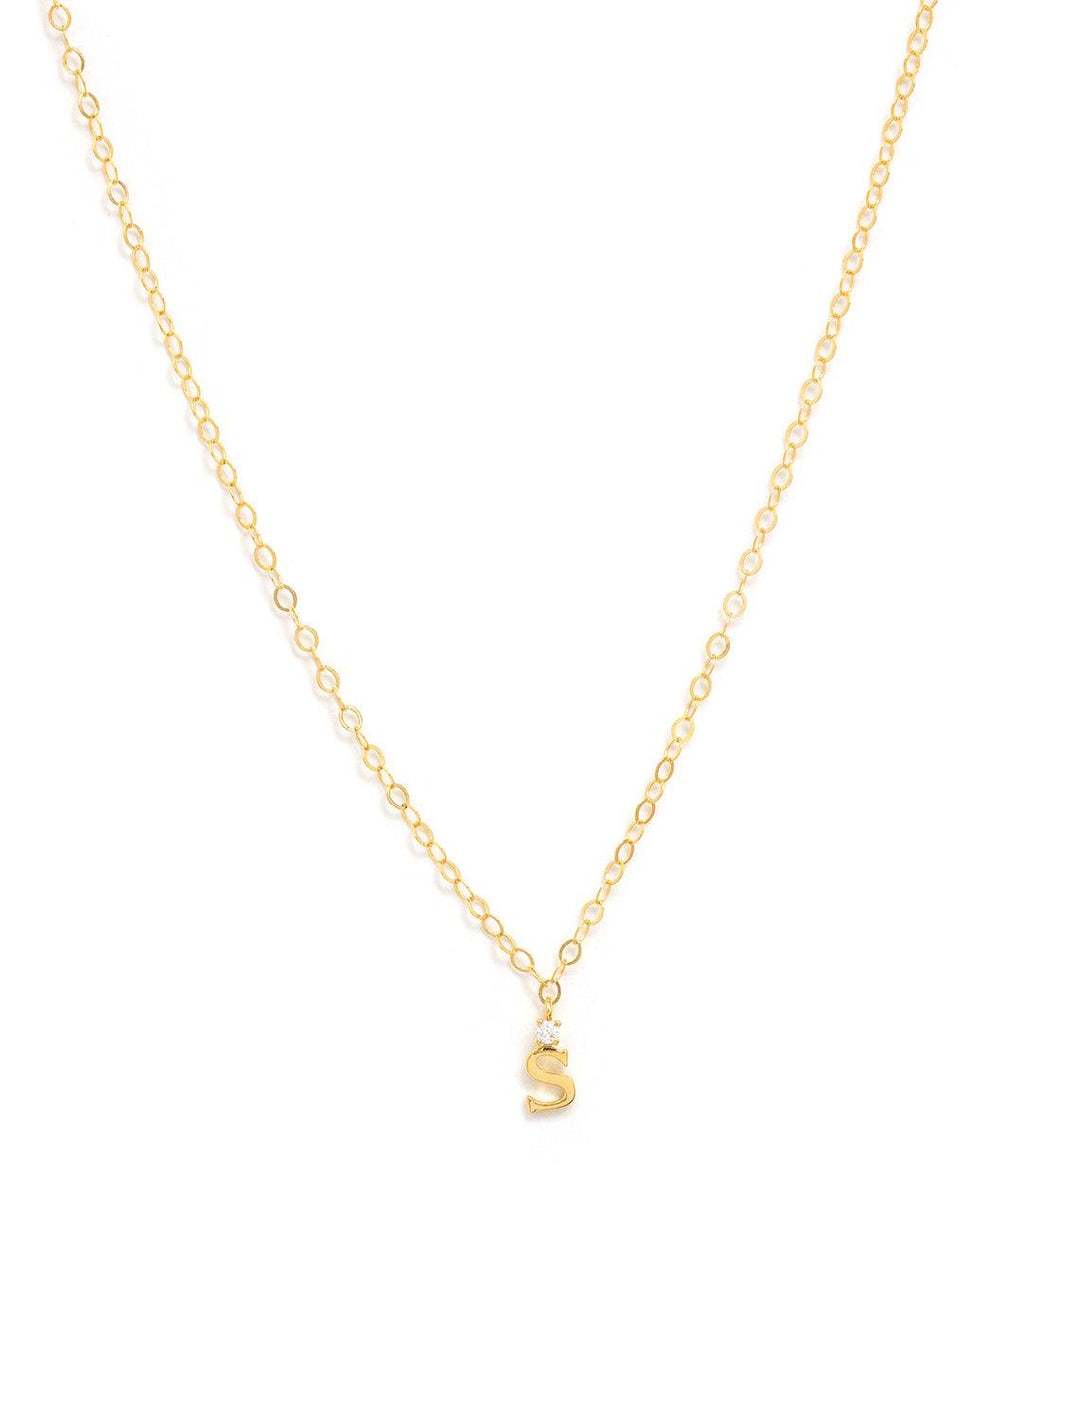 Marit Rae initial and cz necklace in gold | S - Twigs